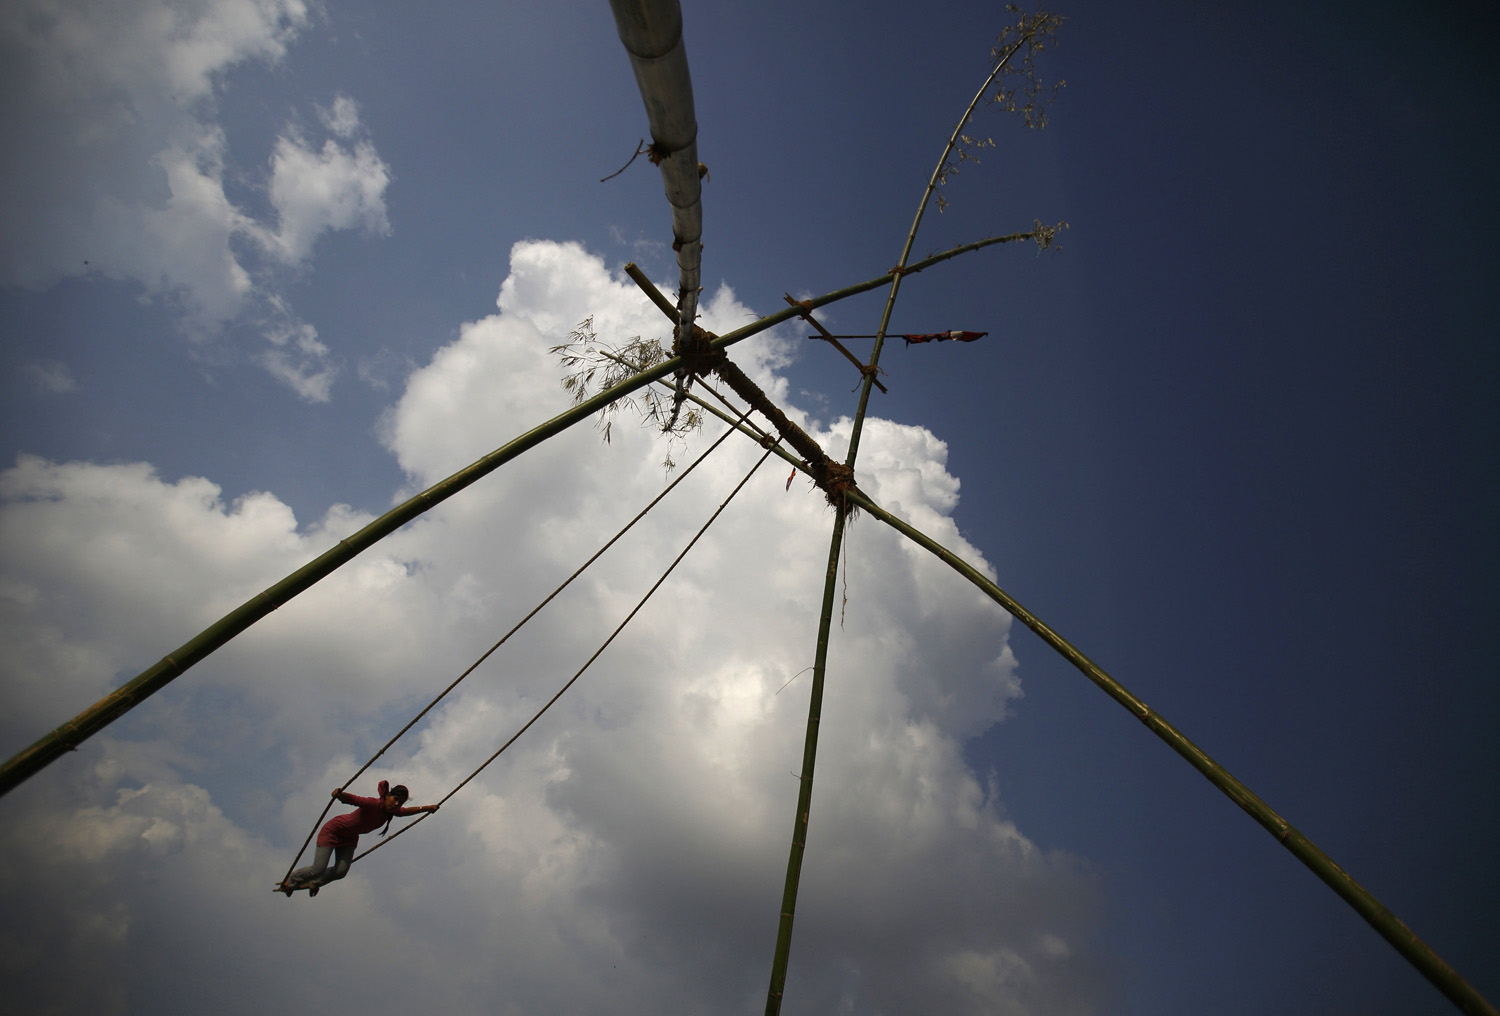 A girl plays on a traditional swing during the Dashain, Hinduism's biggest religious festival, in Kathmandu